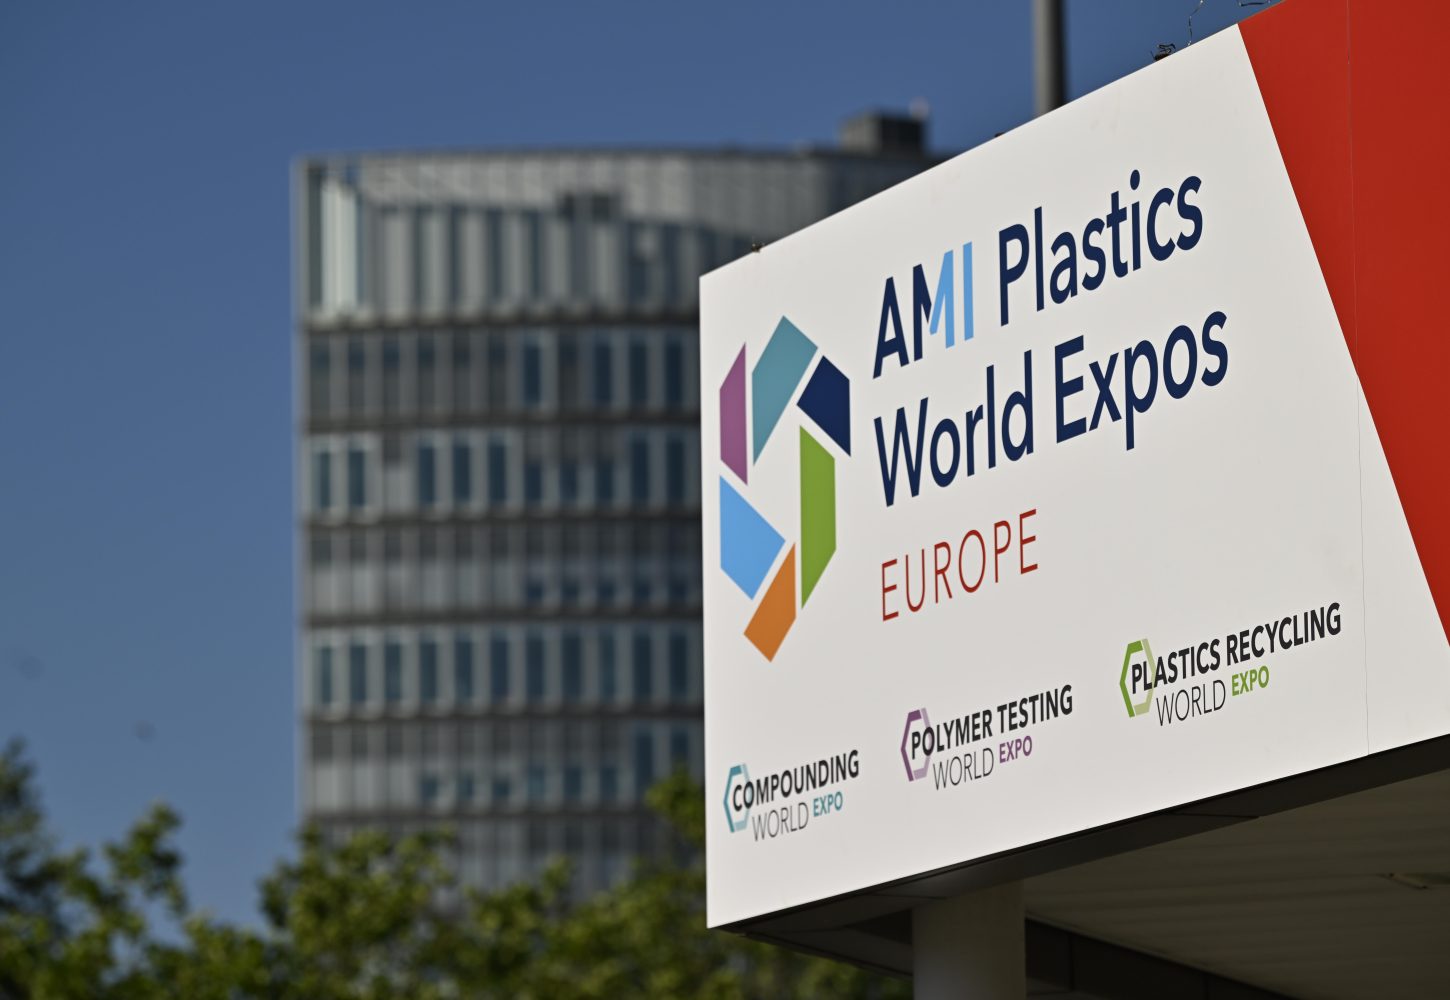 Europe's focused exhibition for plastics additives and compounding